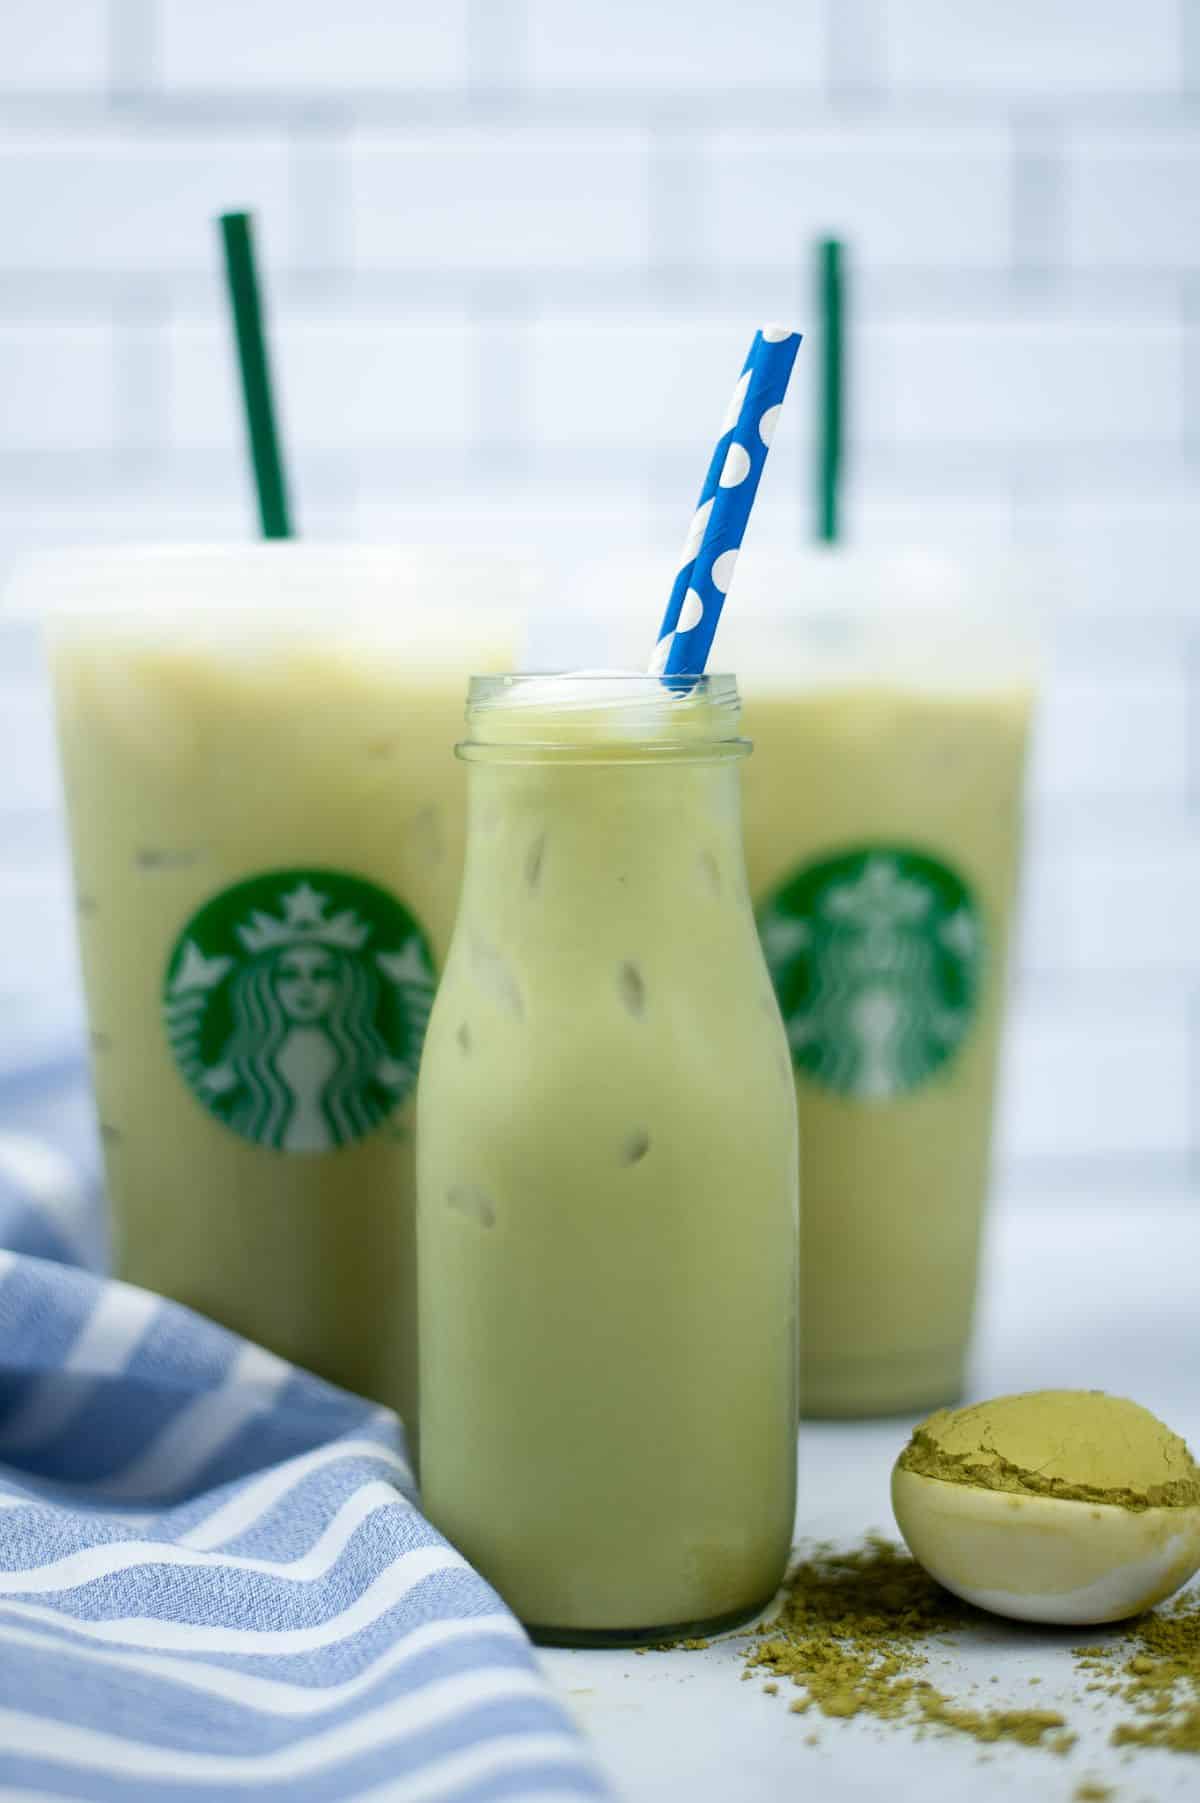 Copycat Starbucks Matcha Green Tea Latte in a bottle with straw, more latte cups in background.